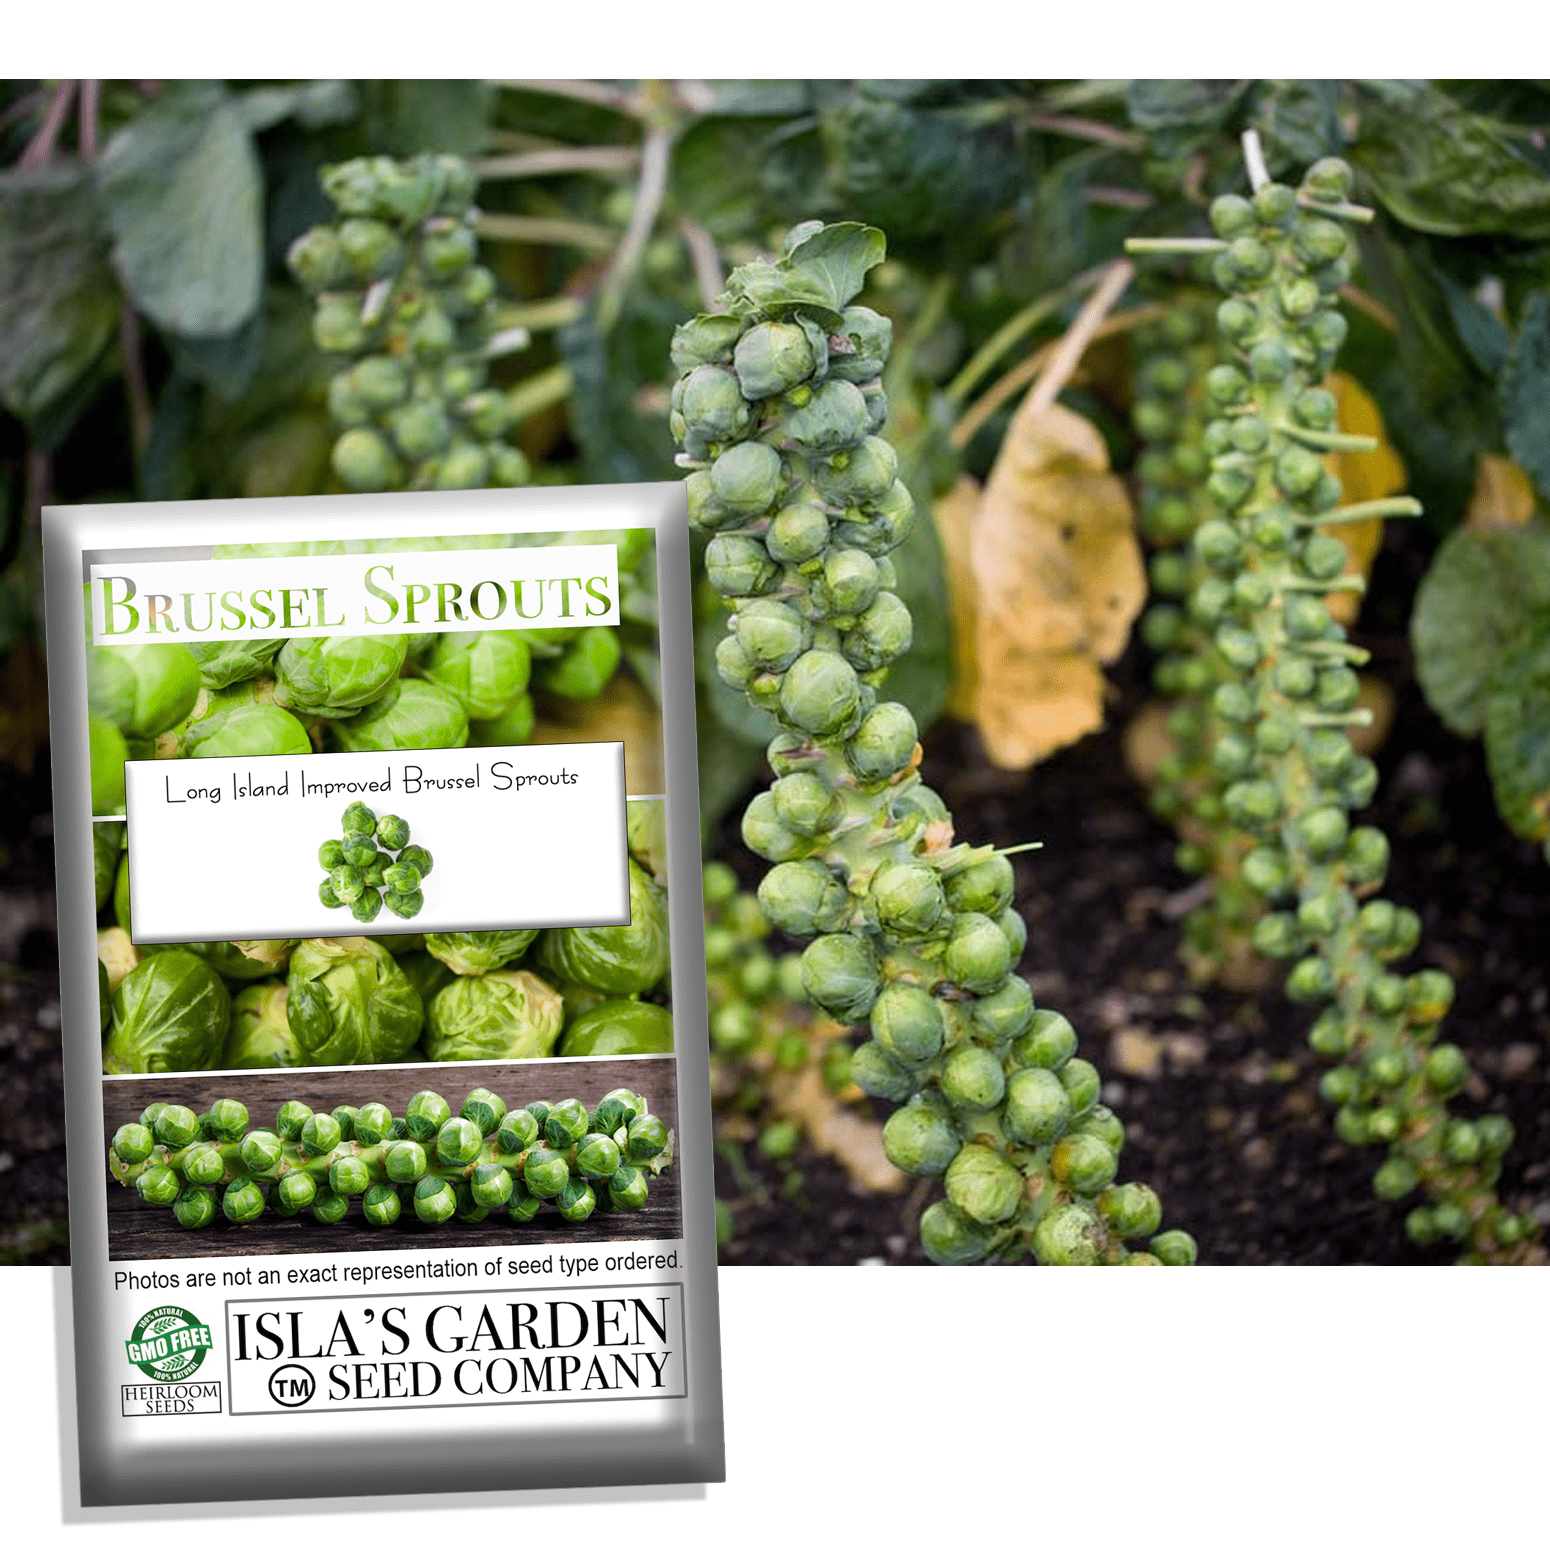 Long Island Improved Brussel Sprout Seeds, 200+ Heirloom Seeds Per Packet, Non GMO Seeds